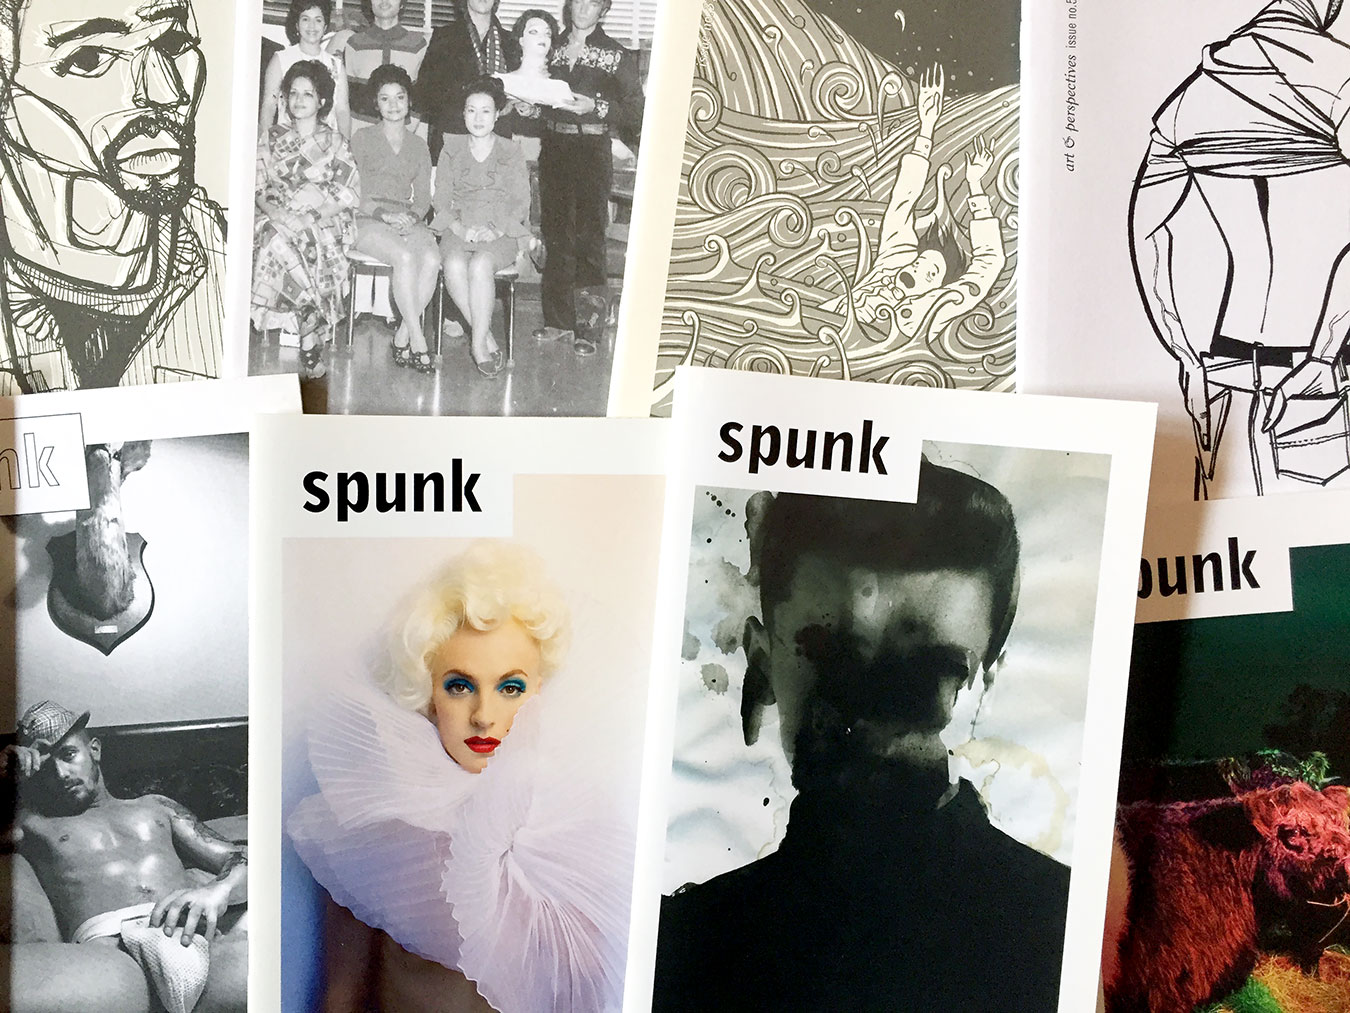 A selection of covers of Aaron Tilford's "Spunk" art magazine. Tilford wrote in the 10th issue that the intention has always been “to inspire, to explore, to create, and to see things in a new way.” | Aaron Tilford